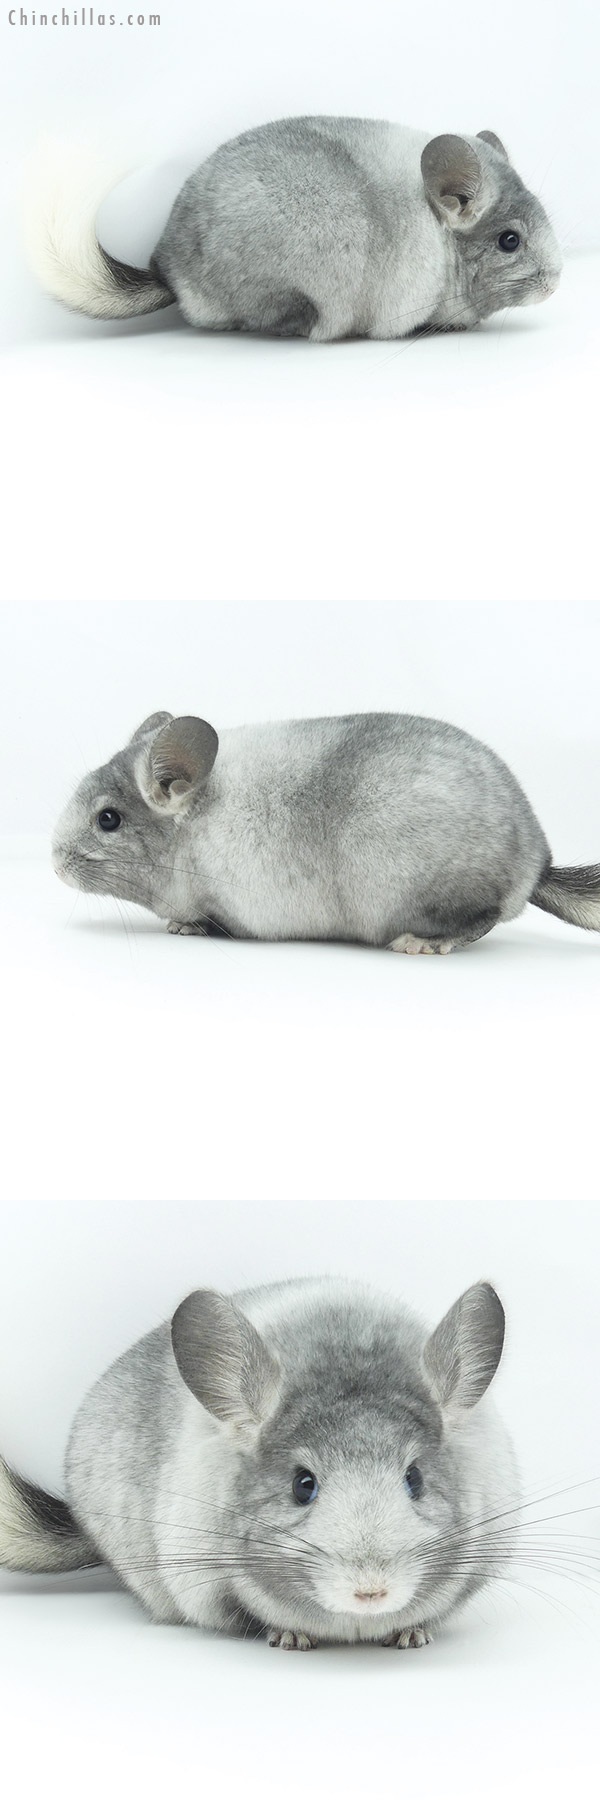 Chinchilla or related item offered for sale or export on Chinchillas.com - 19364 Blocky Premium Production Quality Ebony & White Mosaic ( Violet Carrier ) Female Chinchilla